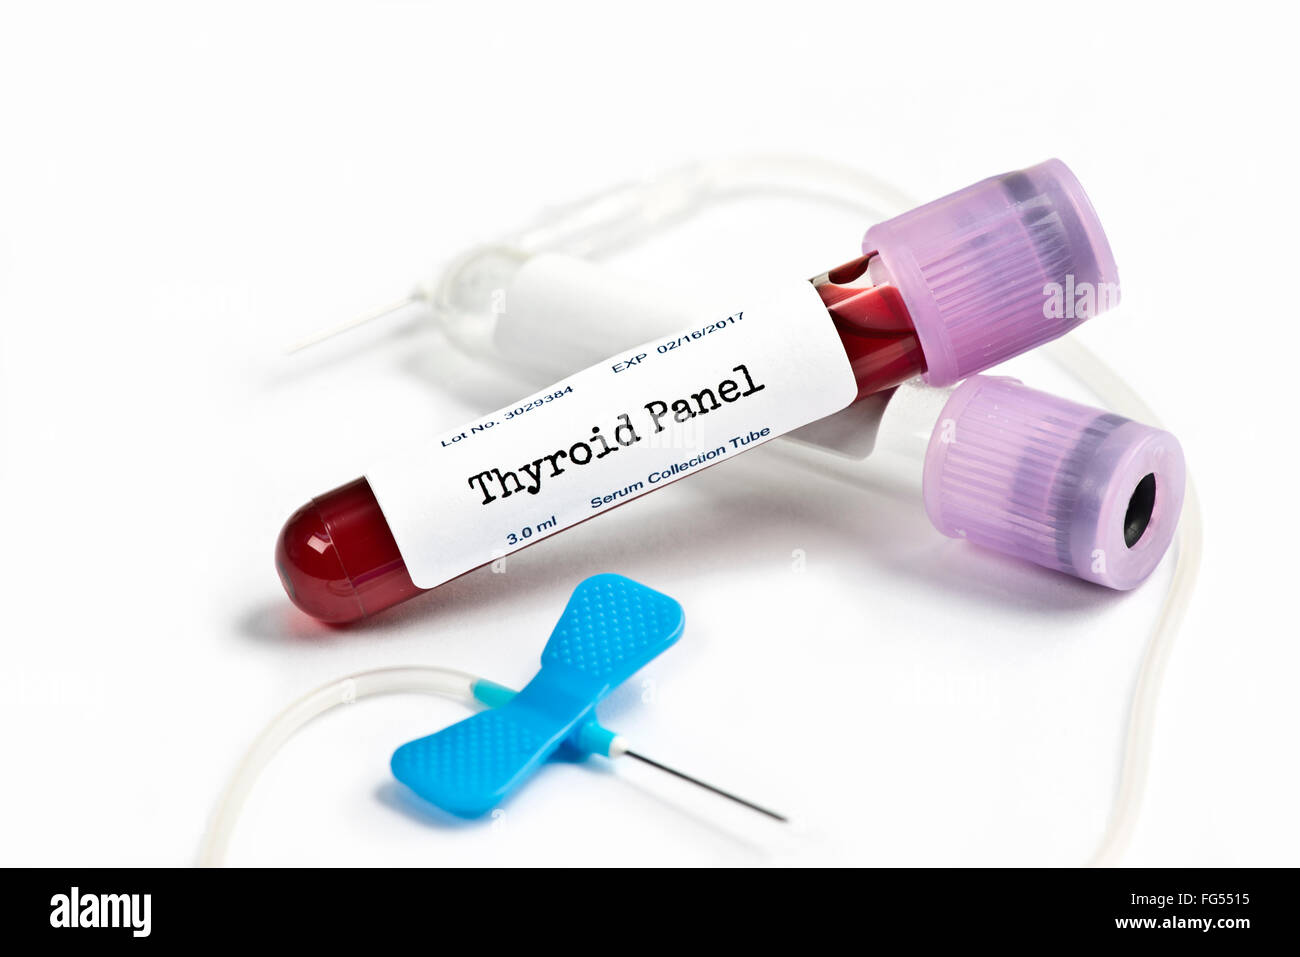 Thyroid test panel blood analysis collection tube with blood collection supplies.  Serial number is random, labels and document Stock Photo